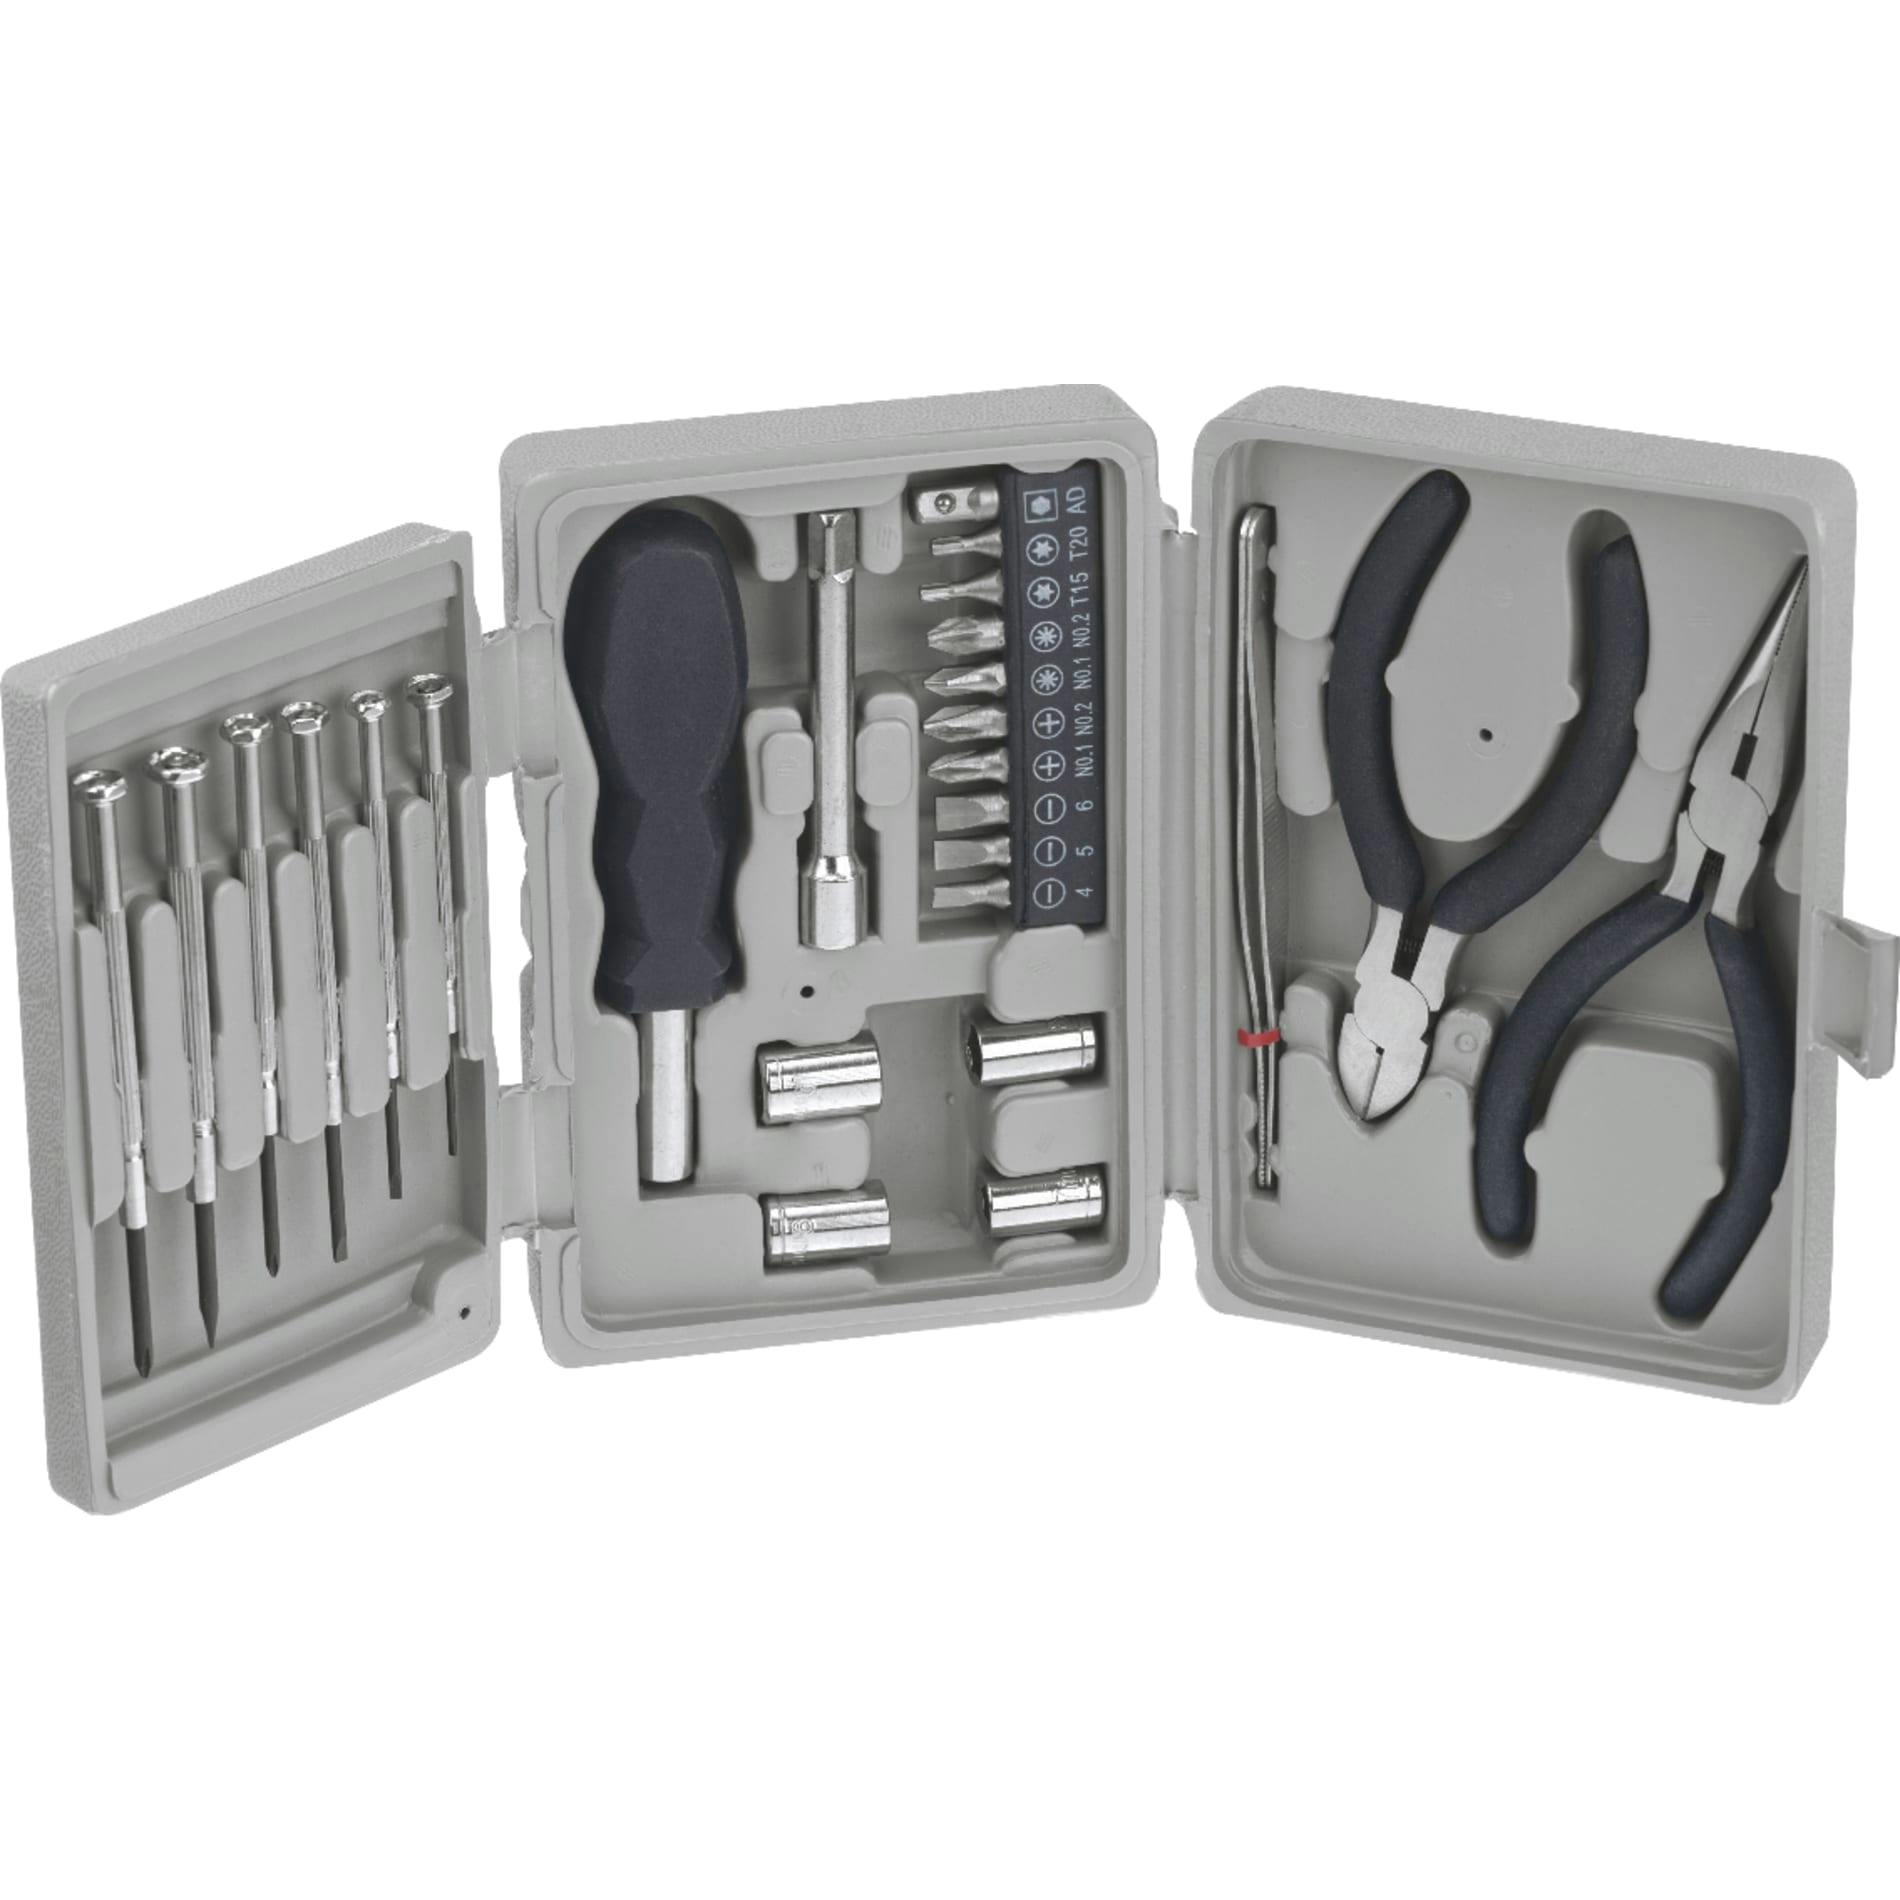 26-Piece Deluxe Tool Kit - additional Image 1